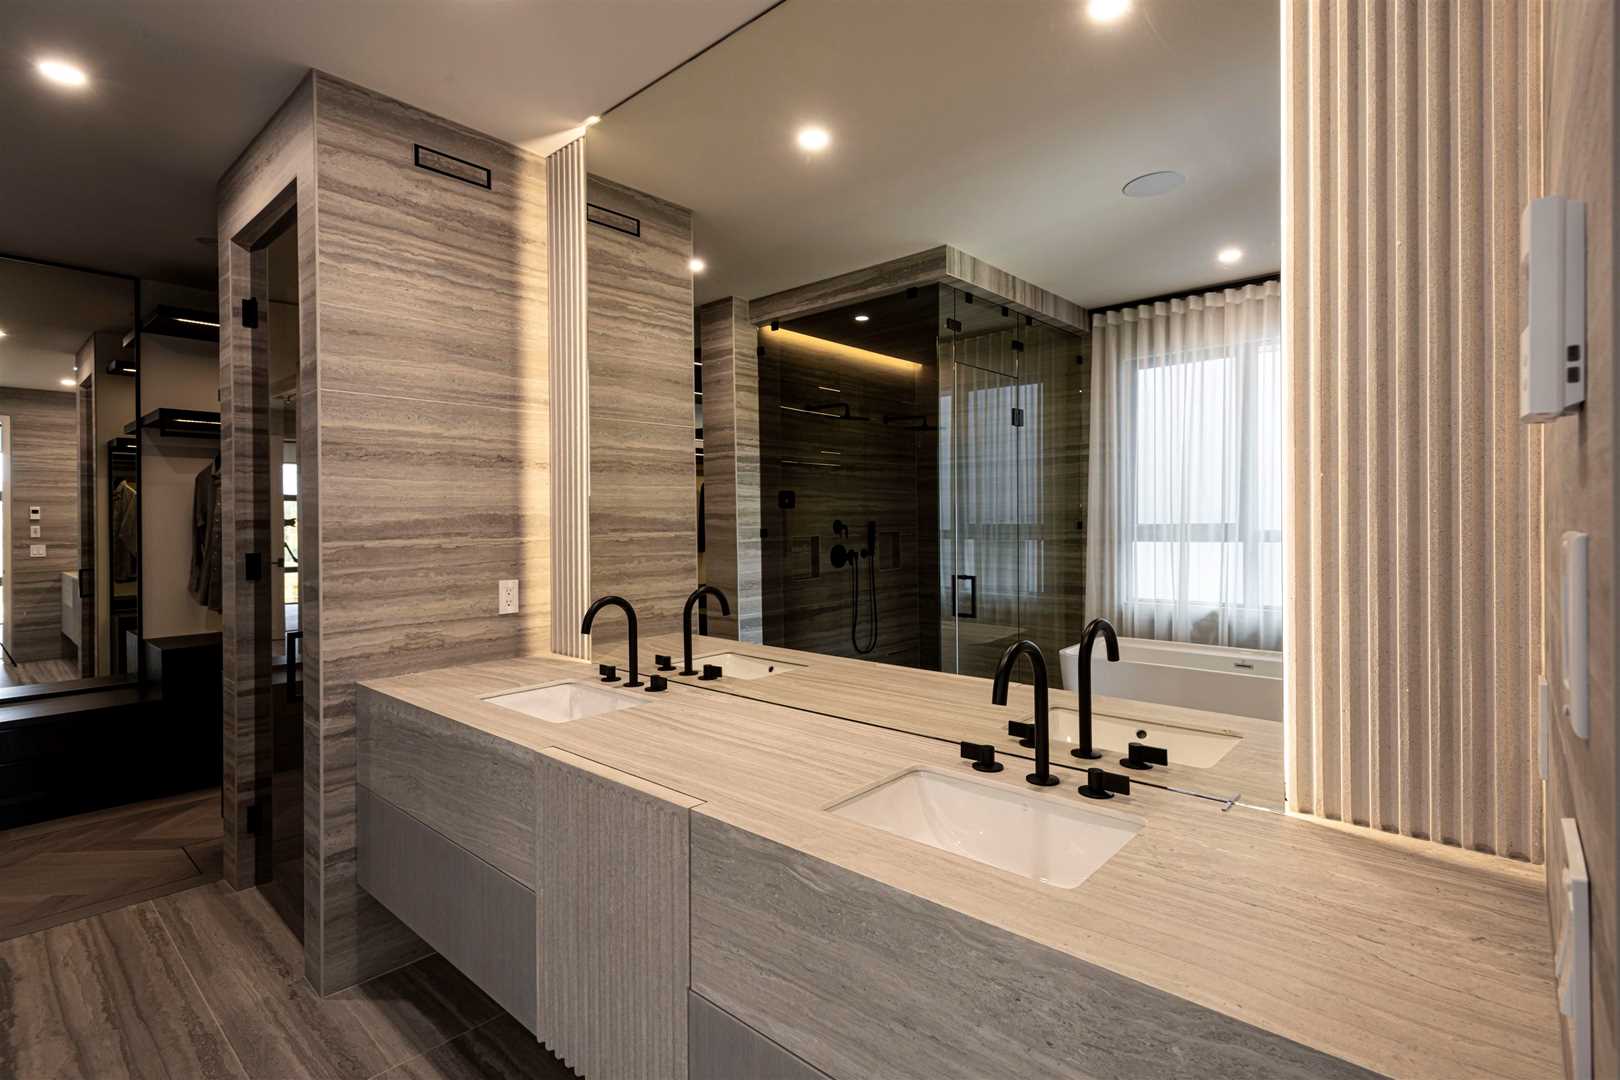 En suite bathroom, light, textured laminate floor with matching counter and walls; two sinks in front of large mirror, shower and closet to left